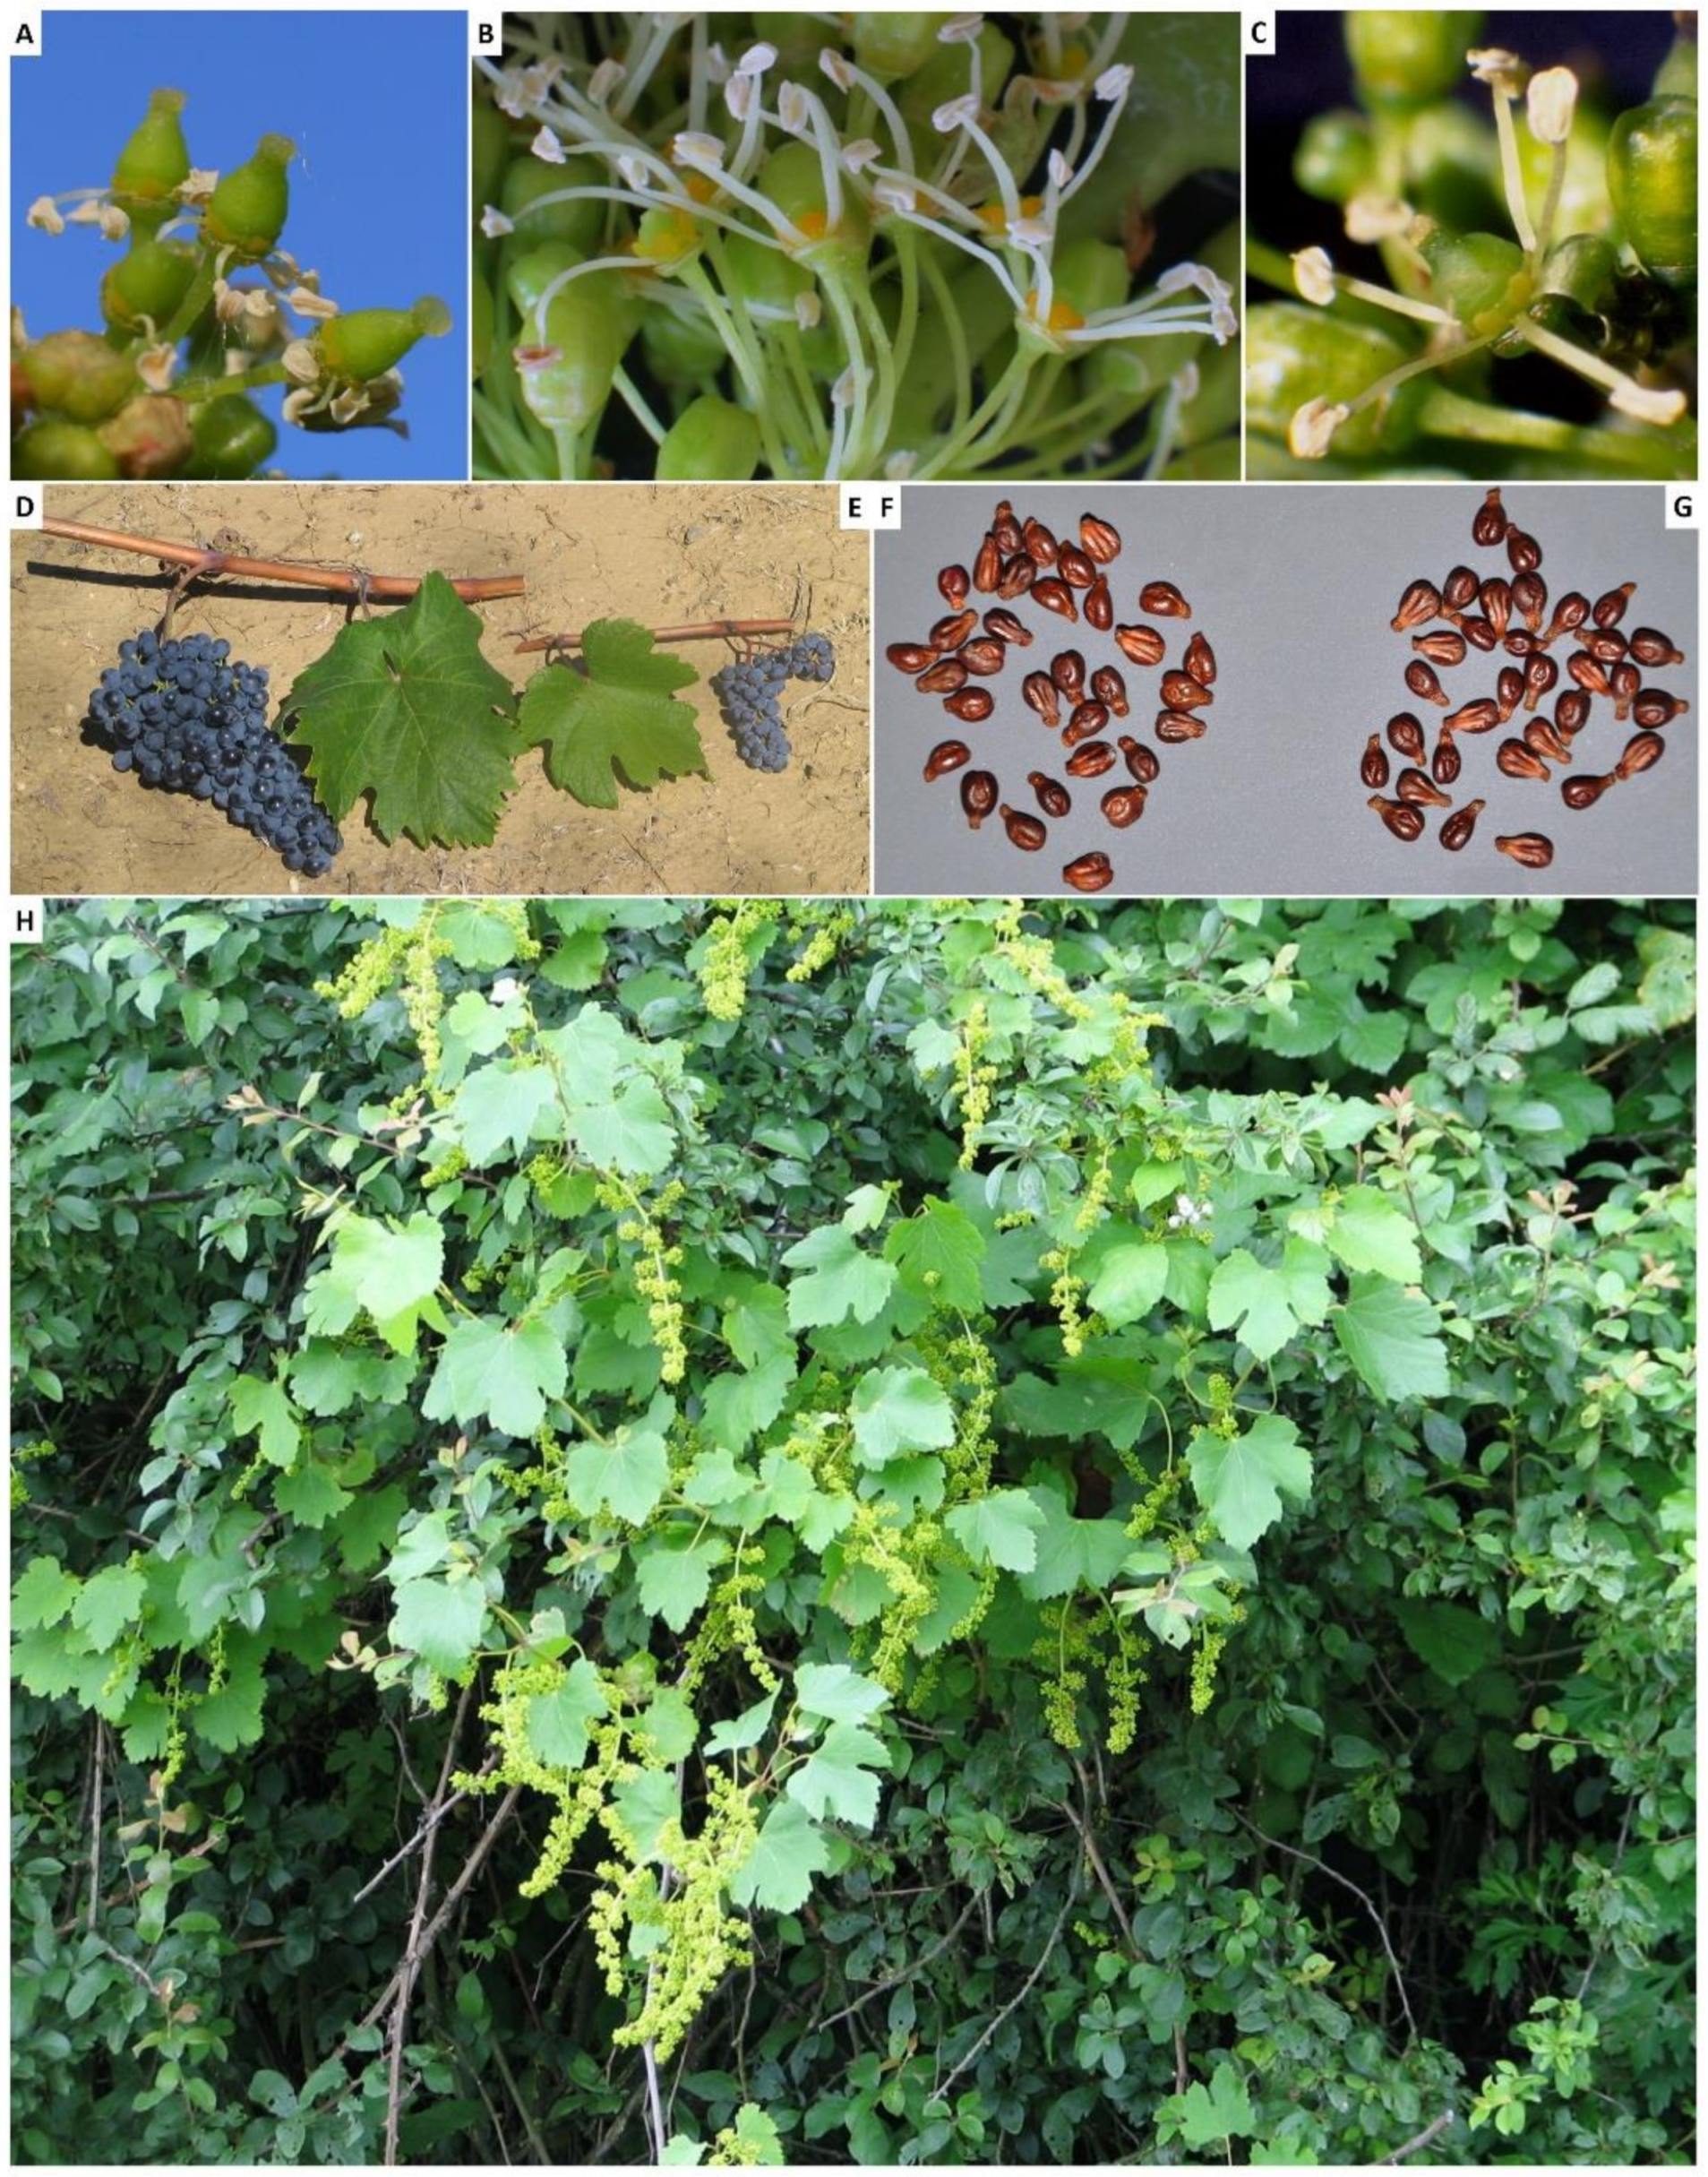 Common Grapevine Pest and Diseases - Wikifarmer